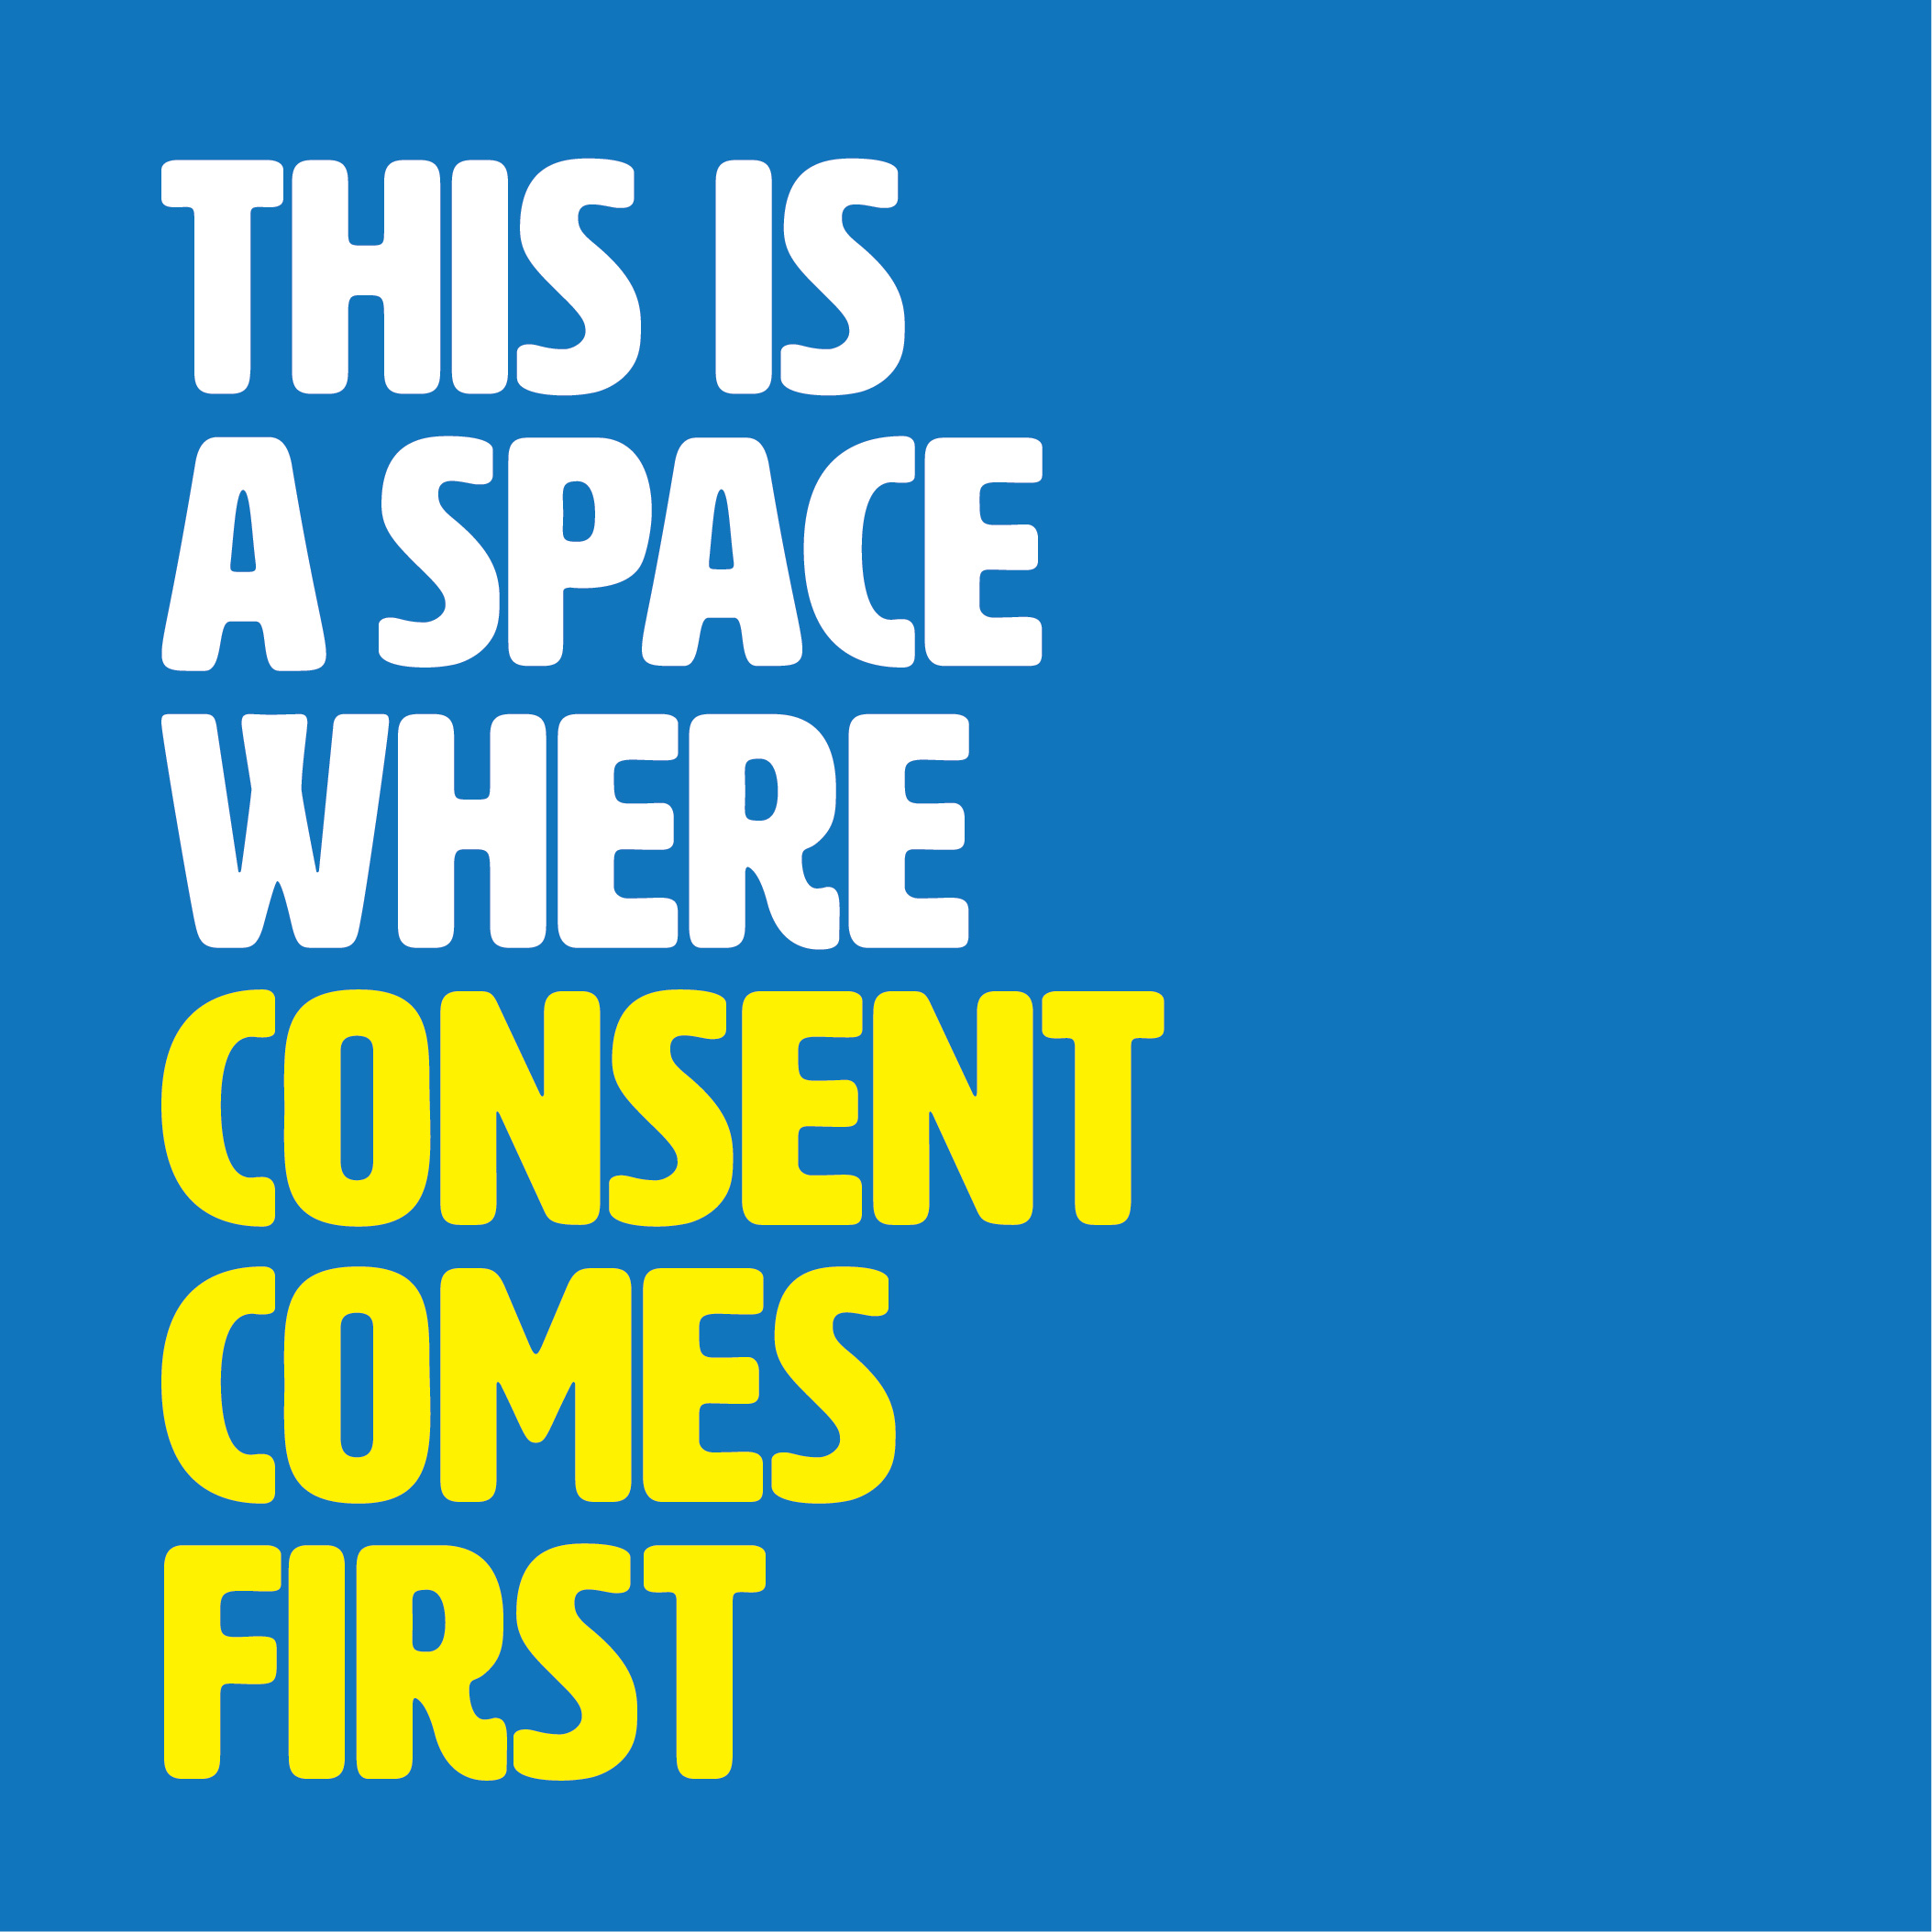 This is a space where consent comes first.